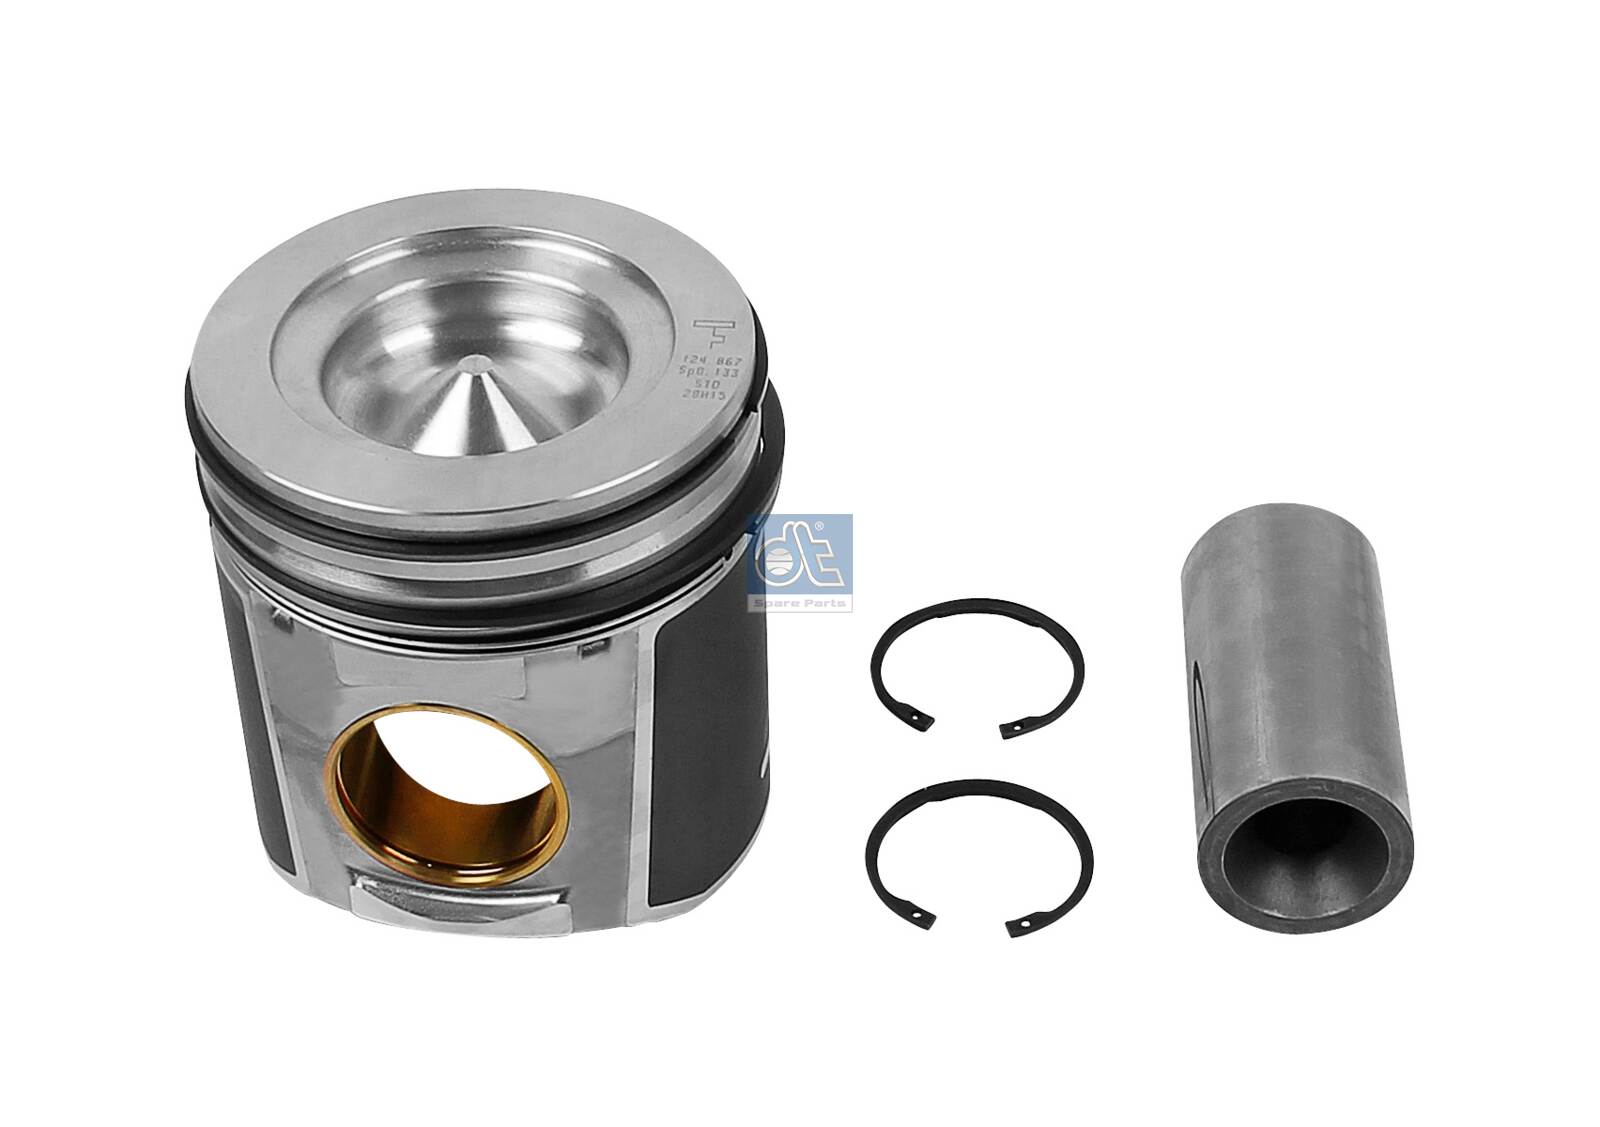 7.54658, Piston with rings and pin, DT Spare Parts, 02996141, 02996319, 02996796, 02997436, 2996141, 2996319, 2996796, 2997436, 500054837, 500054838, 065.156, 103712, 120480, 41478600, 120482, 41478960, 87-434100-00, 782160/782165, 782190/782195, 852300, 7.54658